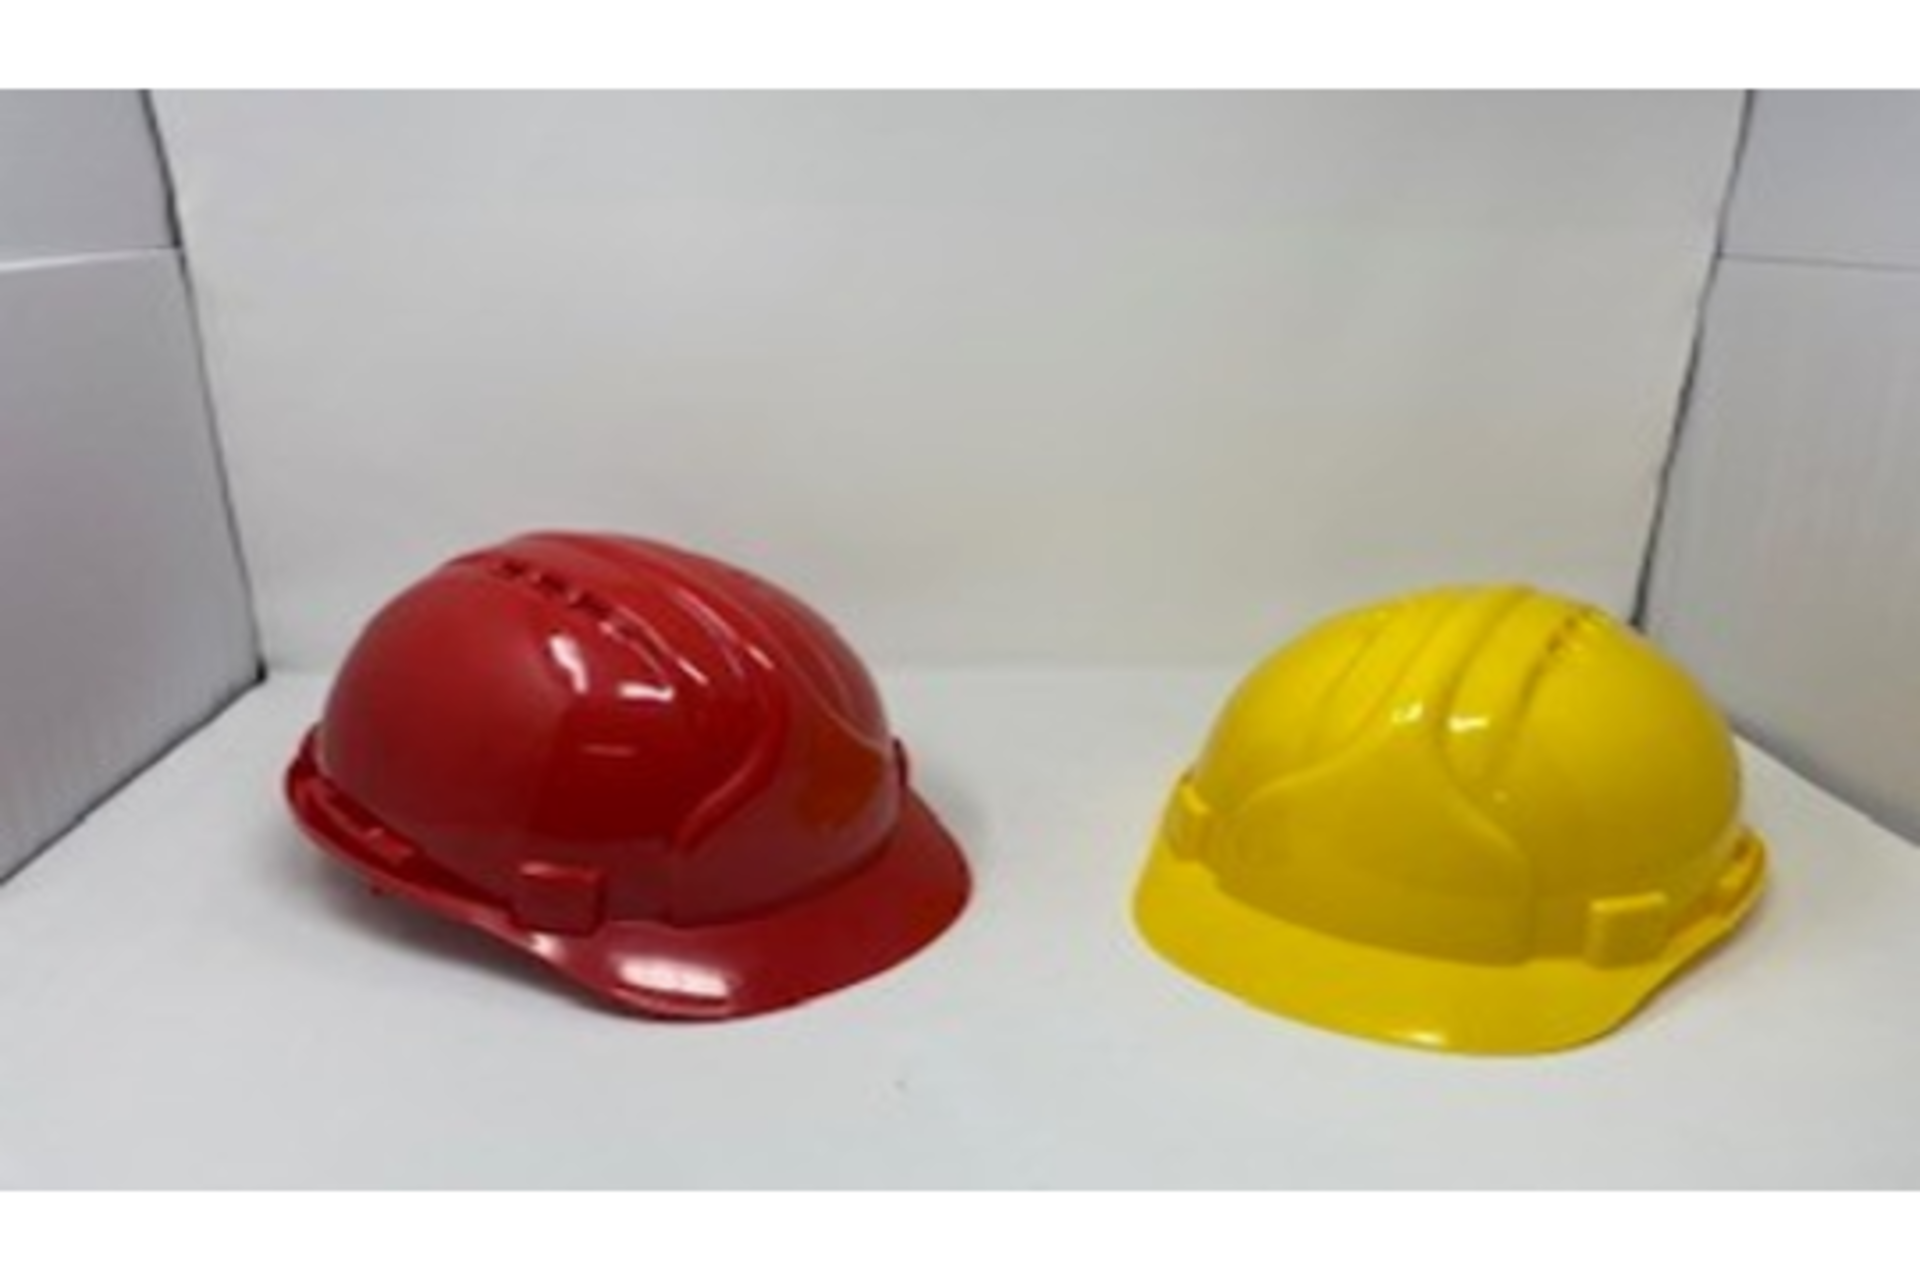 30 X BRAND NEW PROFESSIONAL RED WORK HARD HATS S1RA